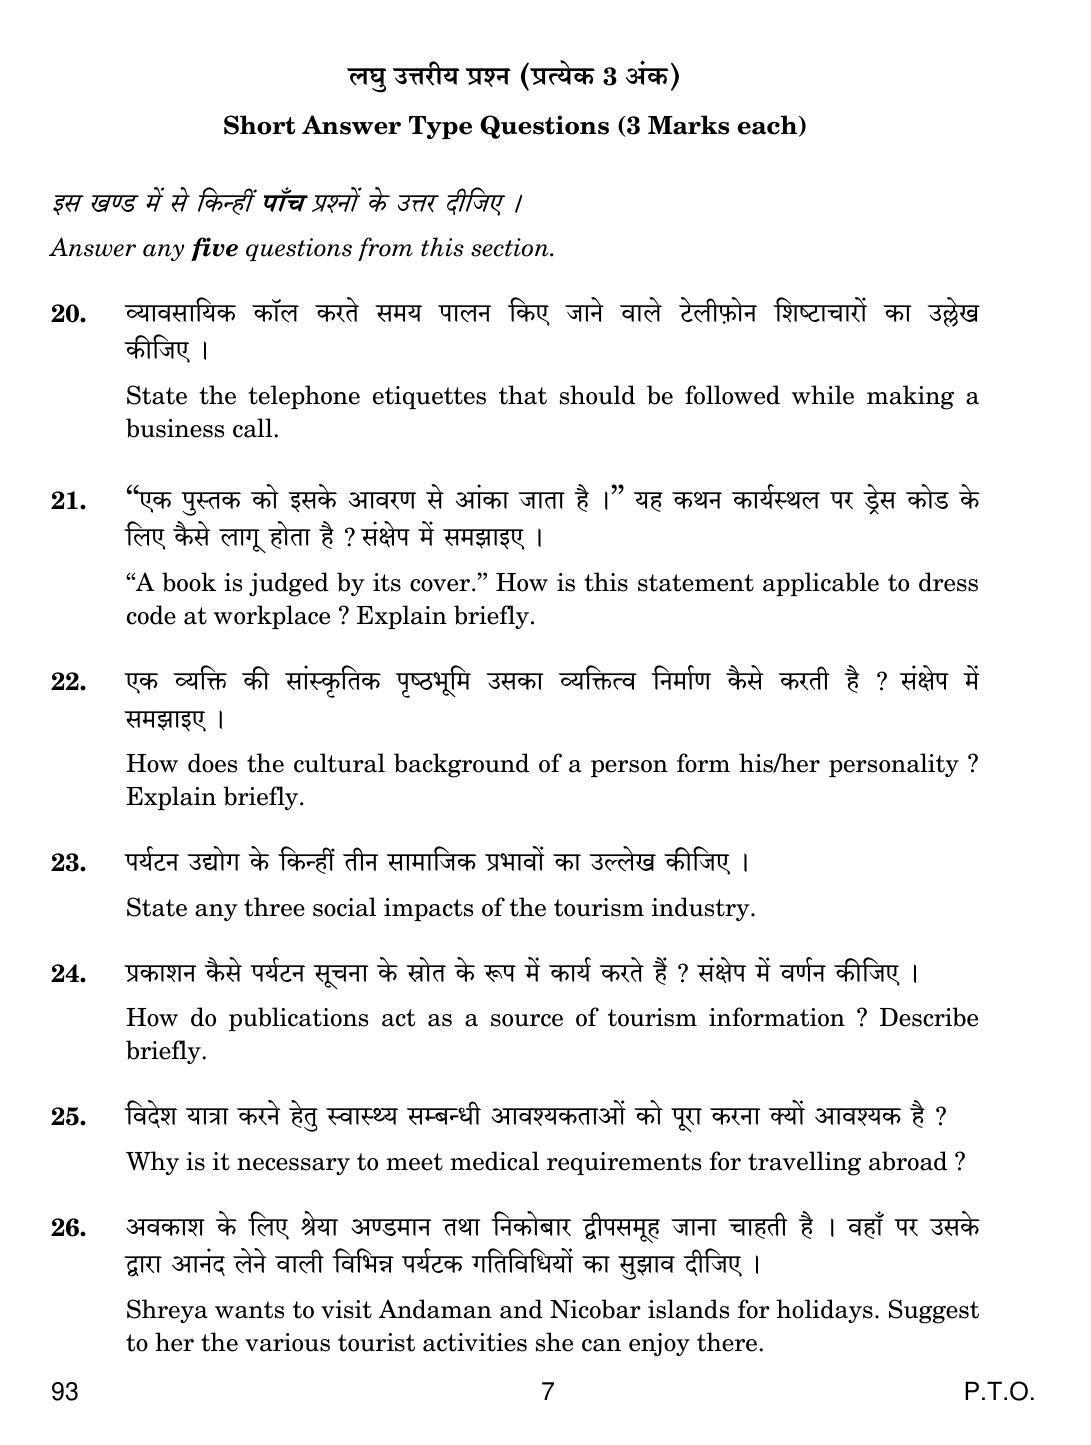 CBSE Class 10 93 INTRODUCTION TO TOURISM 2019 Question Paper - Page 7